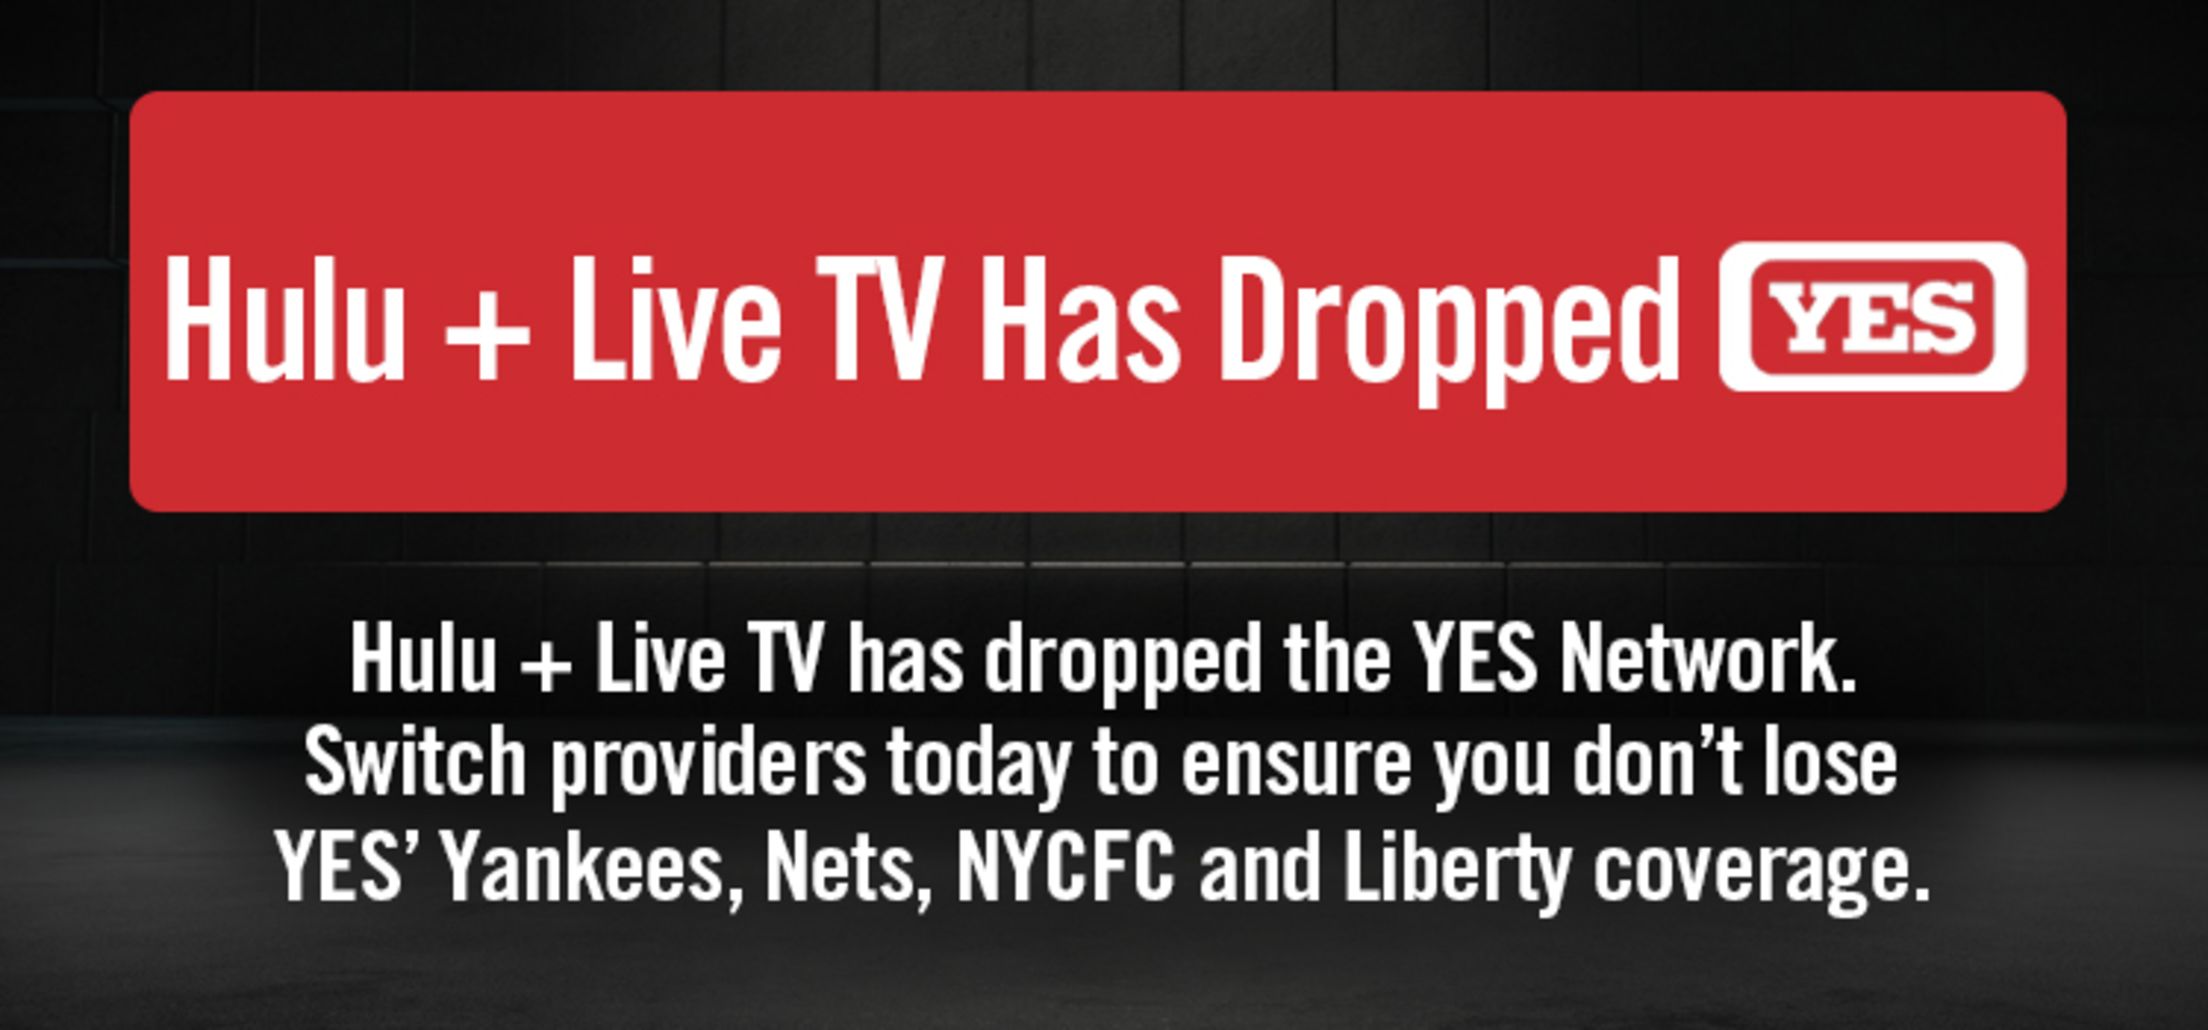 Keep YES Network YES Network